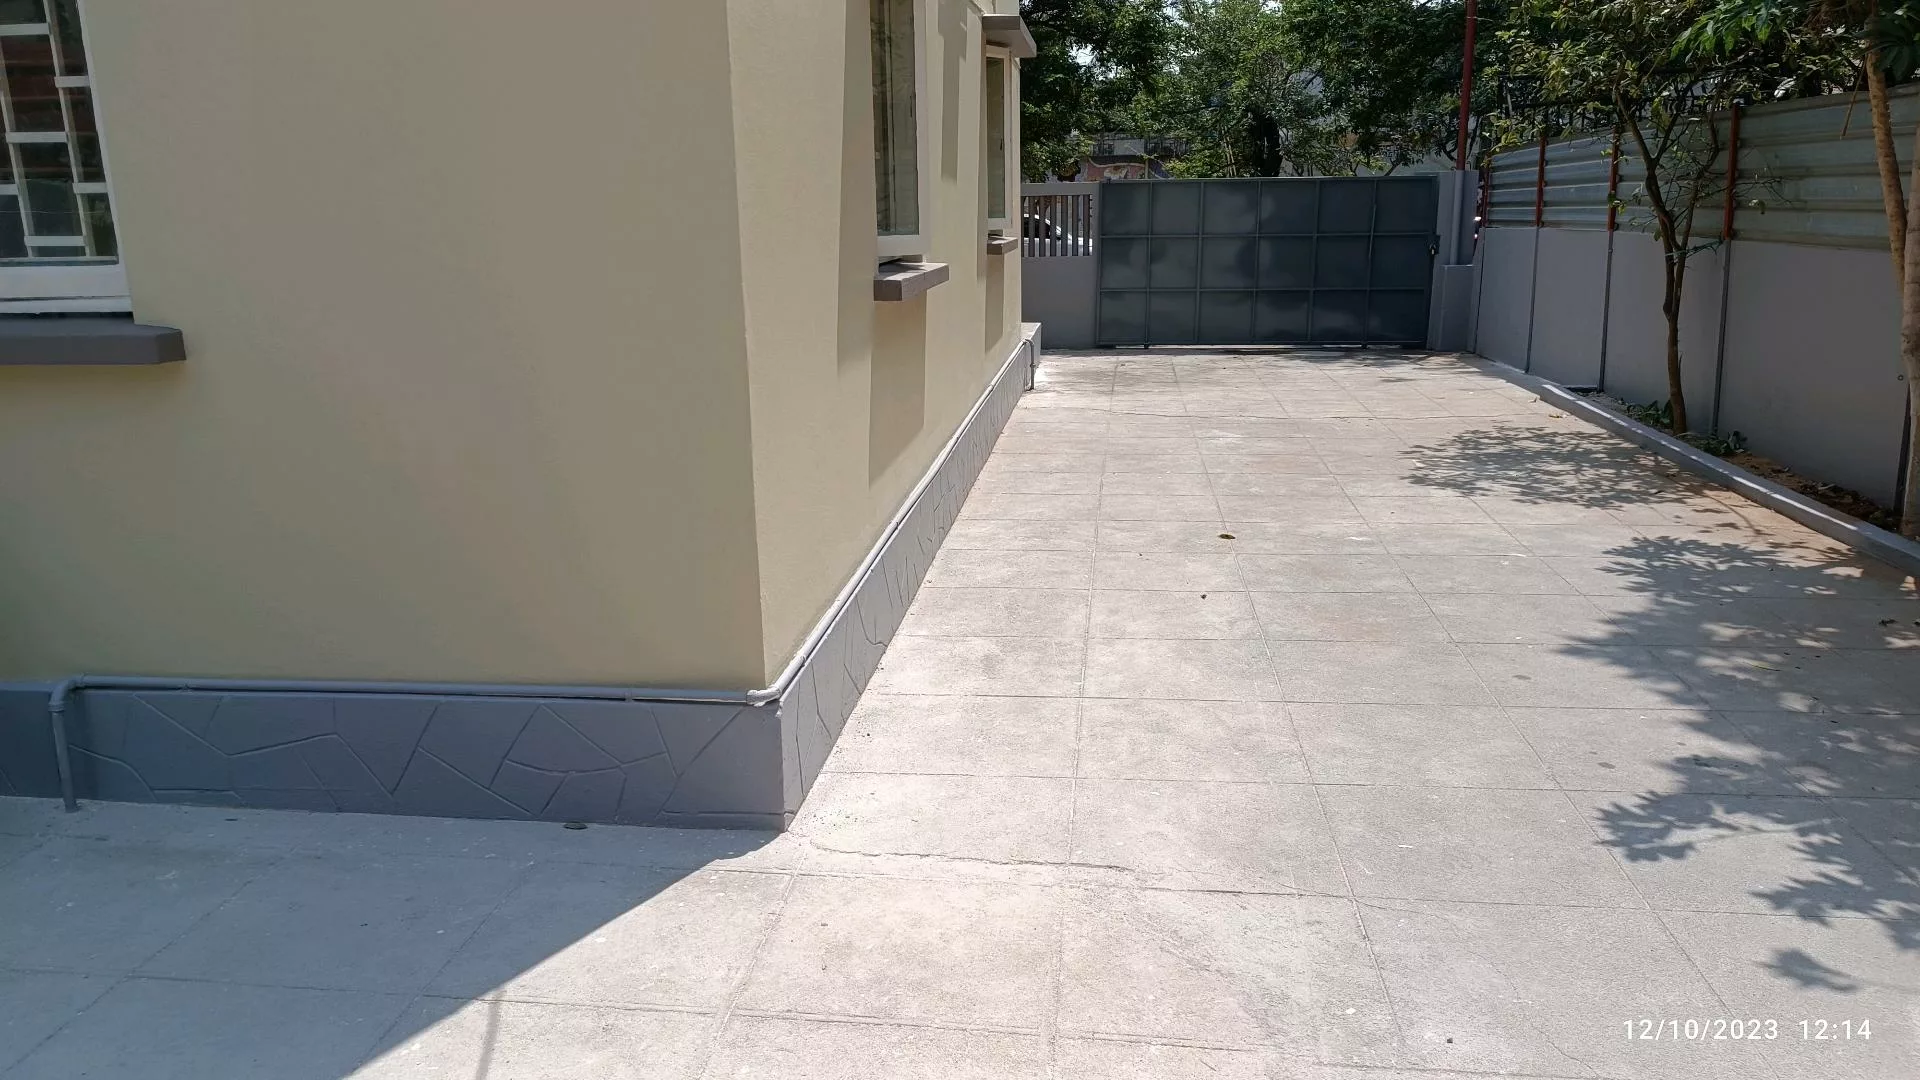 Rent: 3-Bedroom Duplex with Private Yard, Ideal for Various Uses (Central Neighborhood, Maputo)